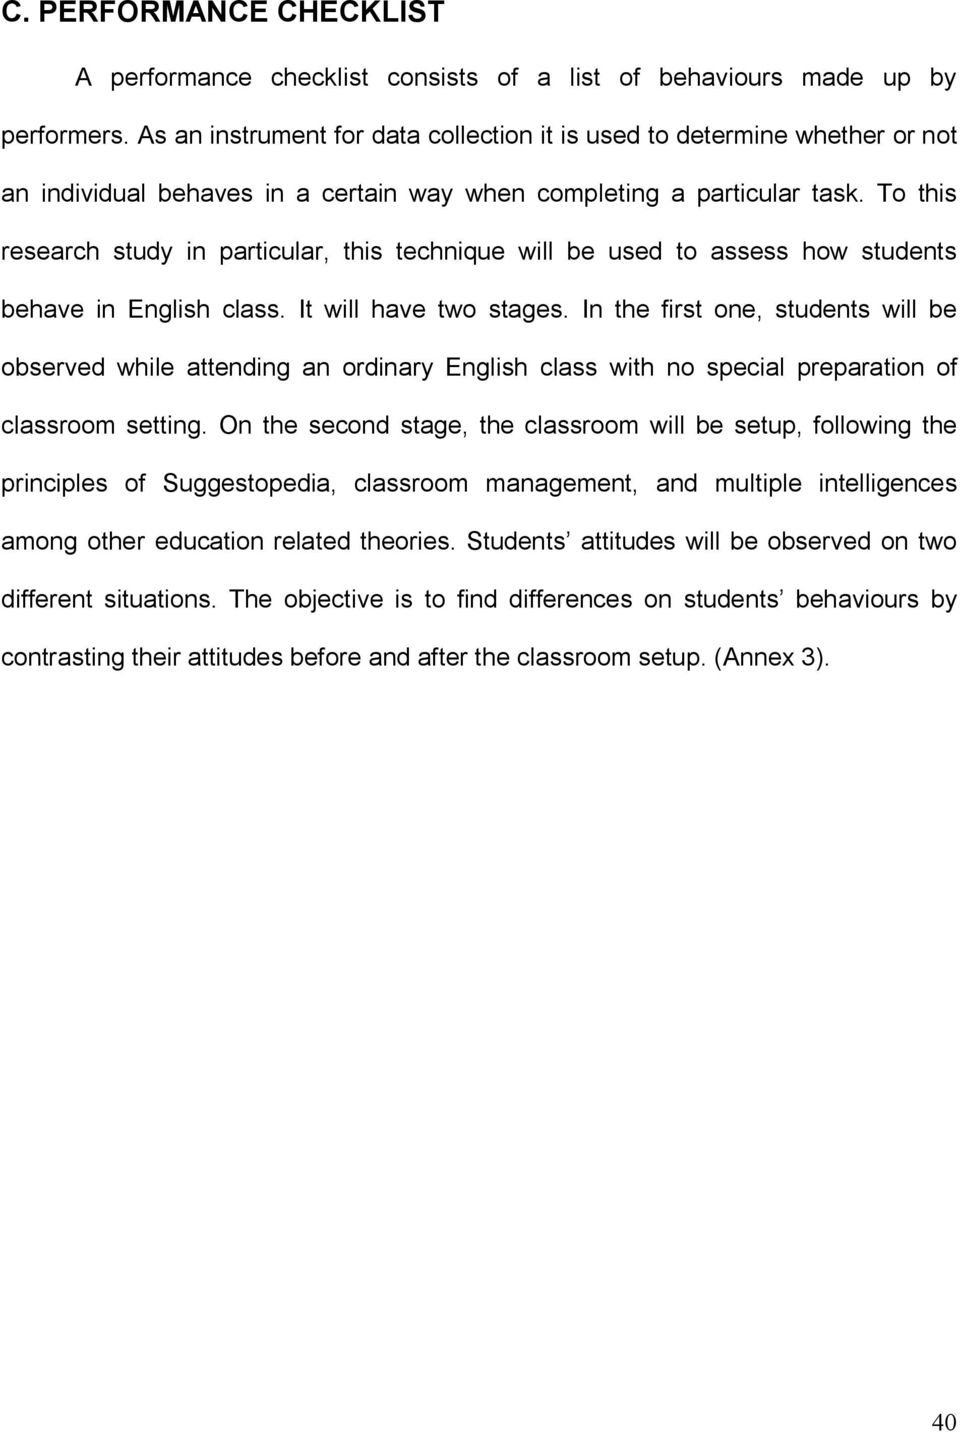 To this research study in particular, this technique will be used to assess how students behave in English class. It will have two stages.